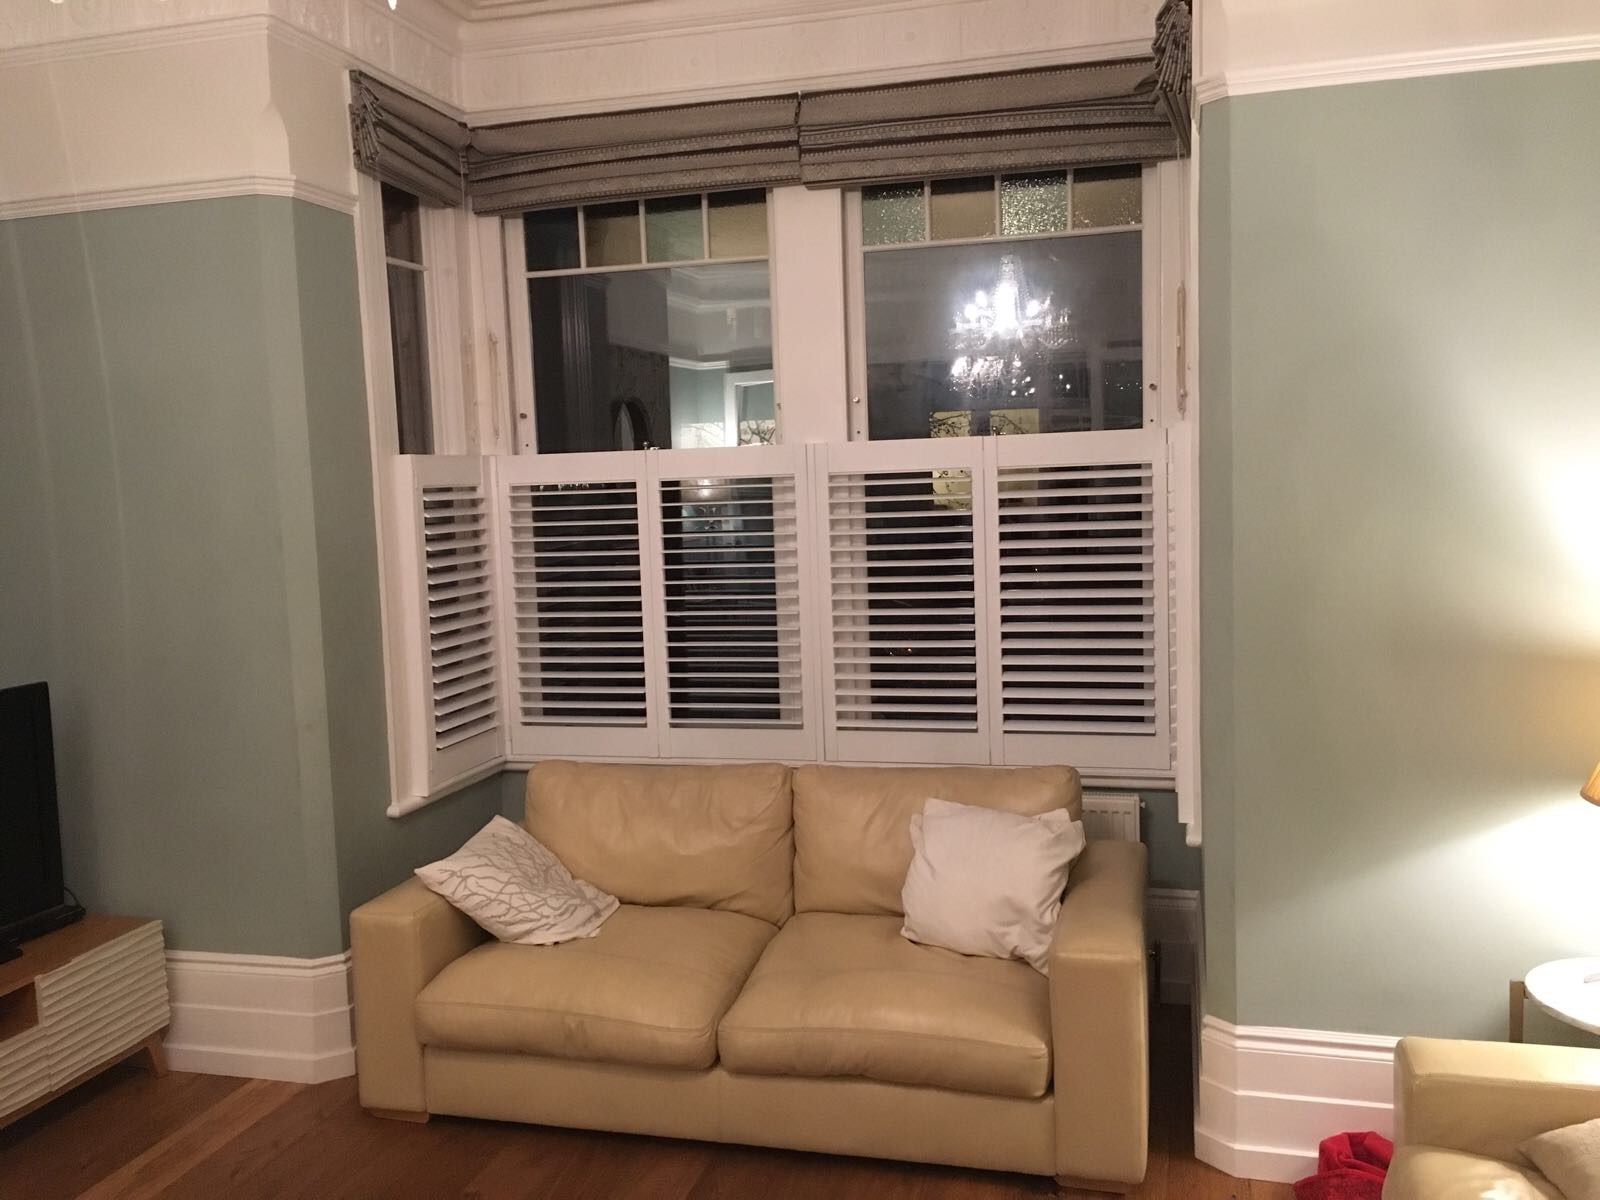 All kinds of blinds have just fit these made to measure cafe style shutters at a property in Barnet. Great Prices - Free Surveys